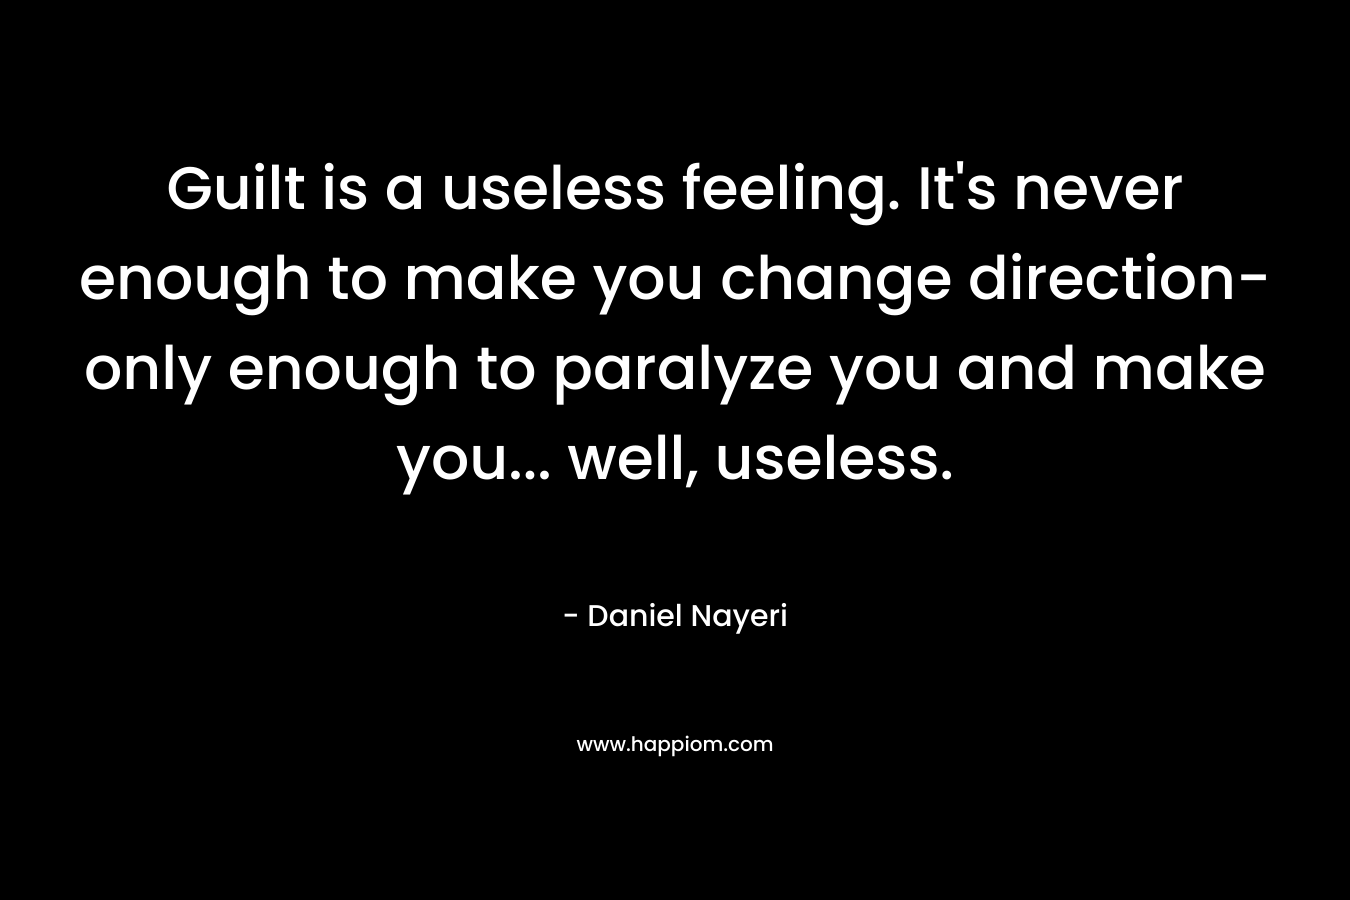 Guilt is a useless feeling. It’s never enough to make you change direction- only enough to paralyze you and make you… well, useless. – Daniel Nayeri